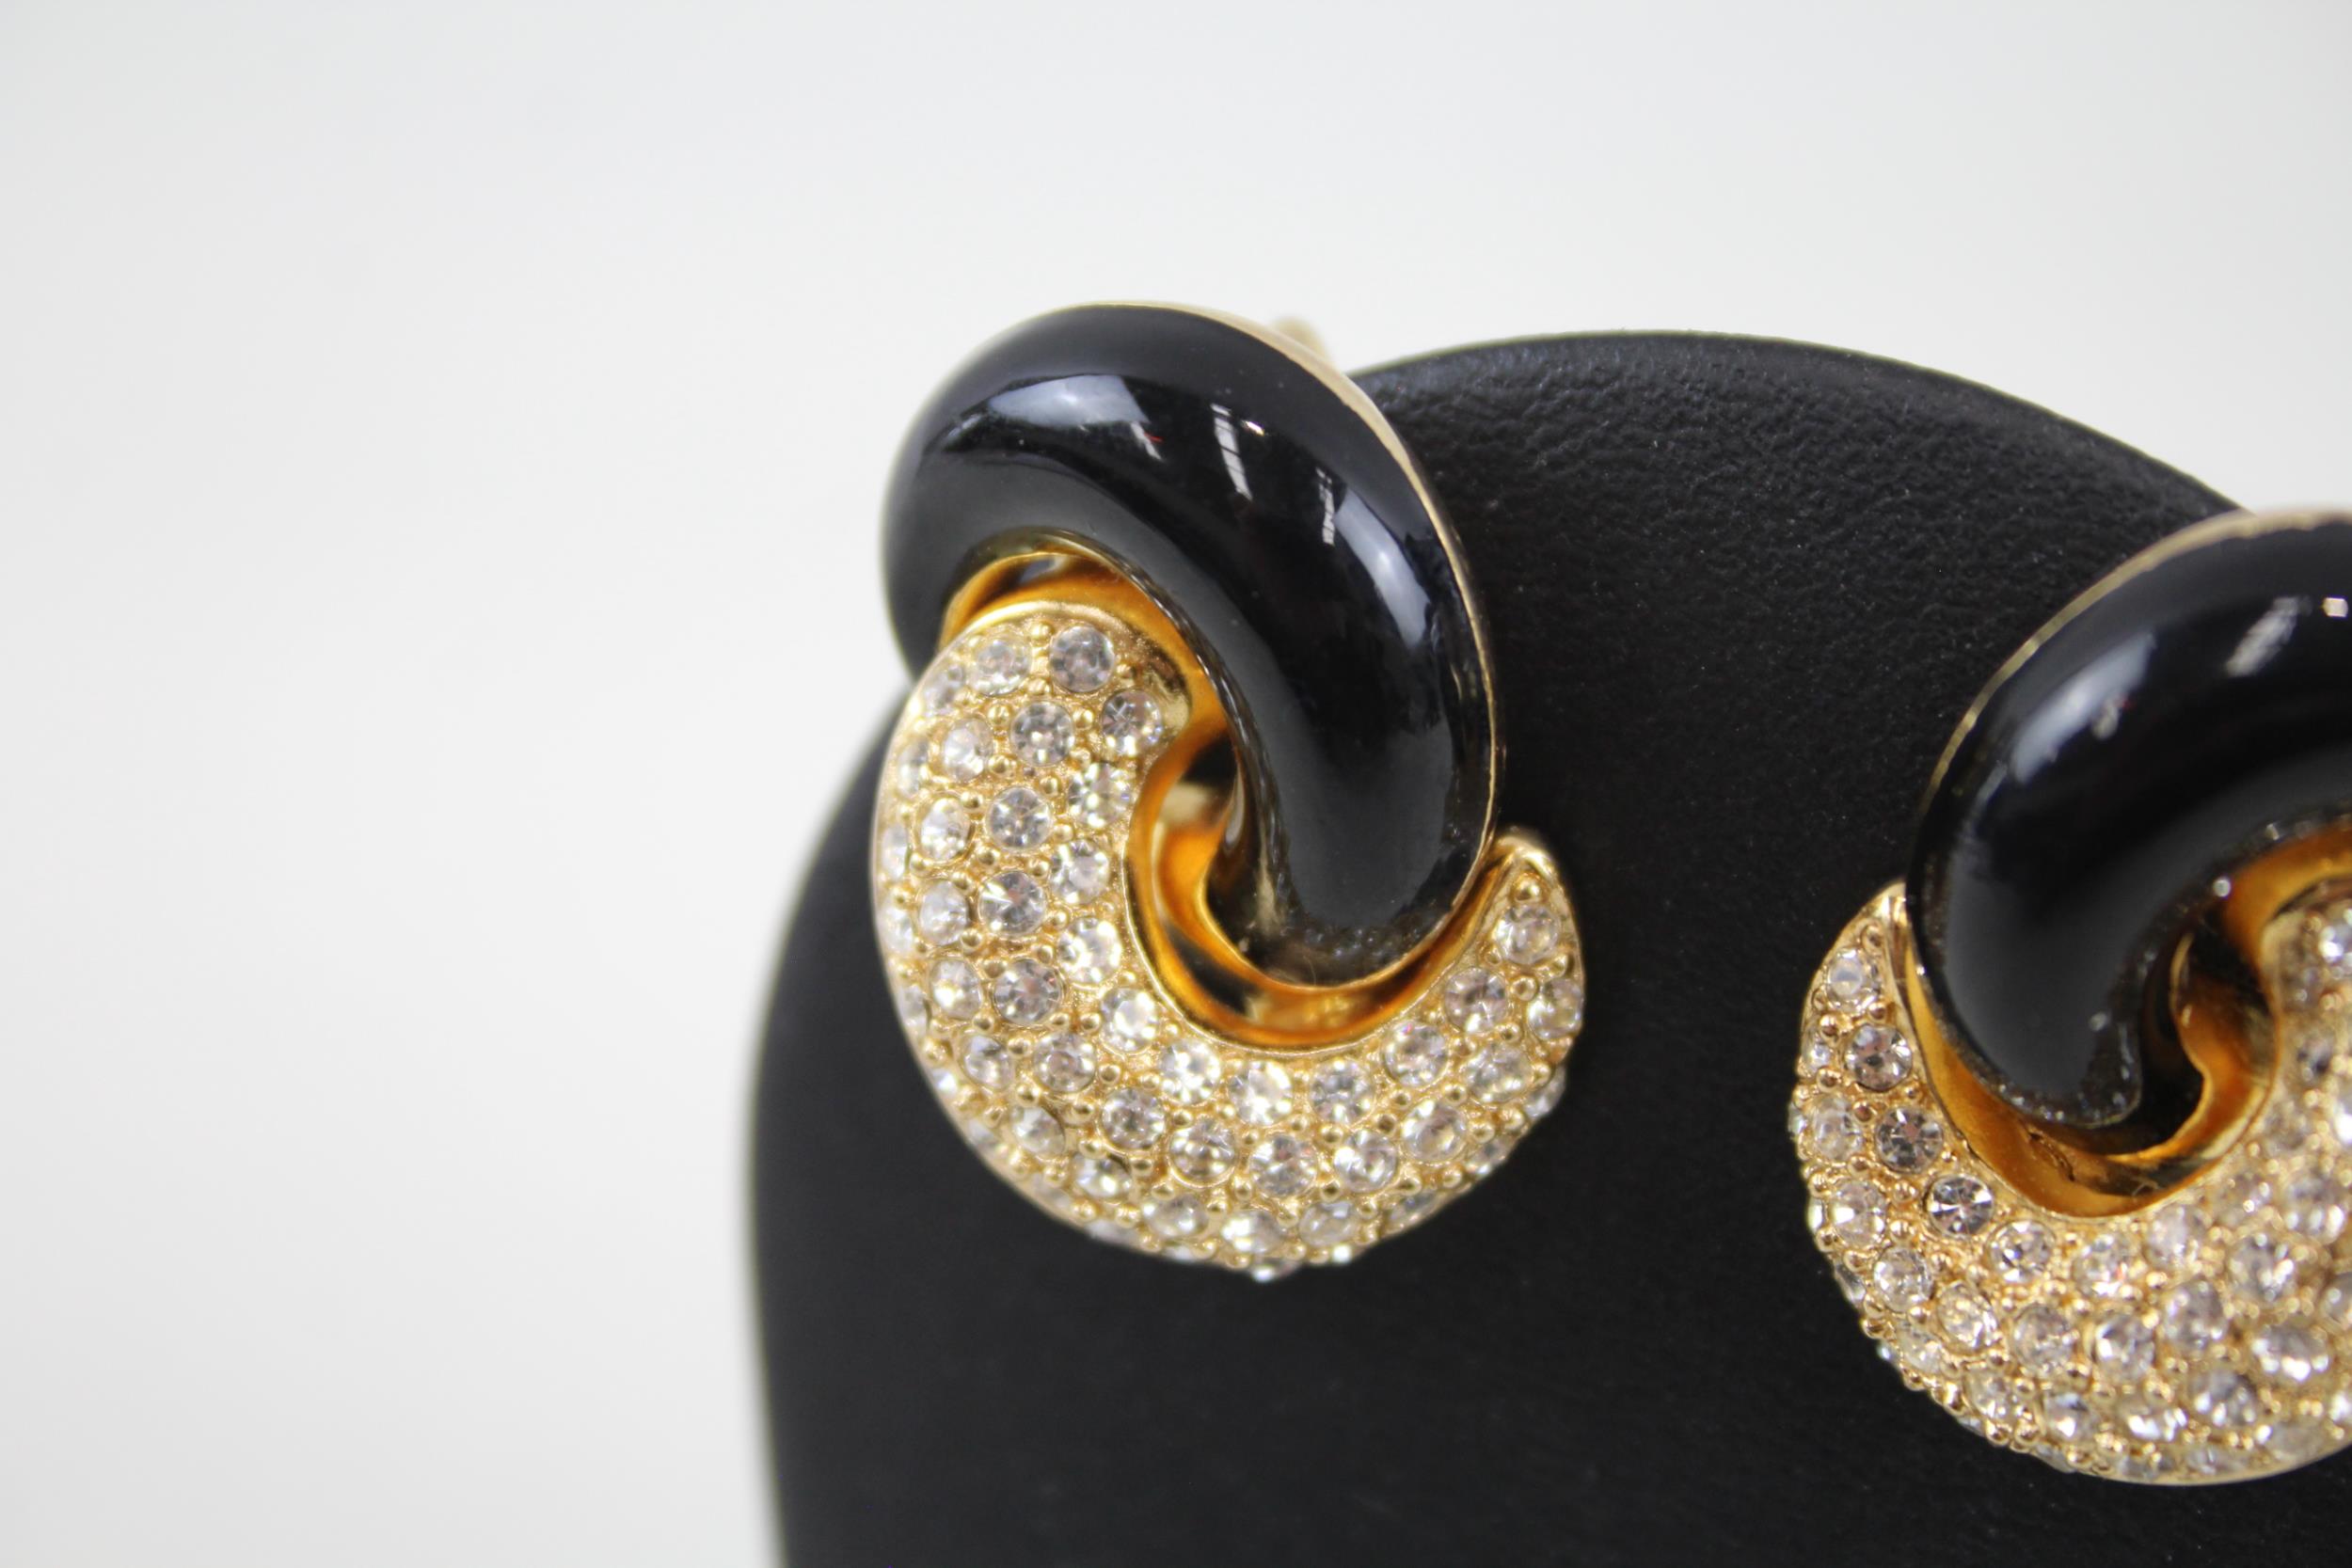 Pair of gold tone enamel and rhinestone clip on earrings by designer Christian Dior (23g) - Image 3 of 5